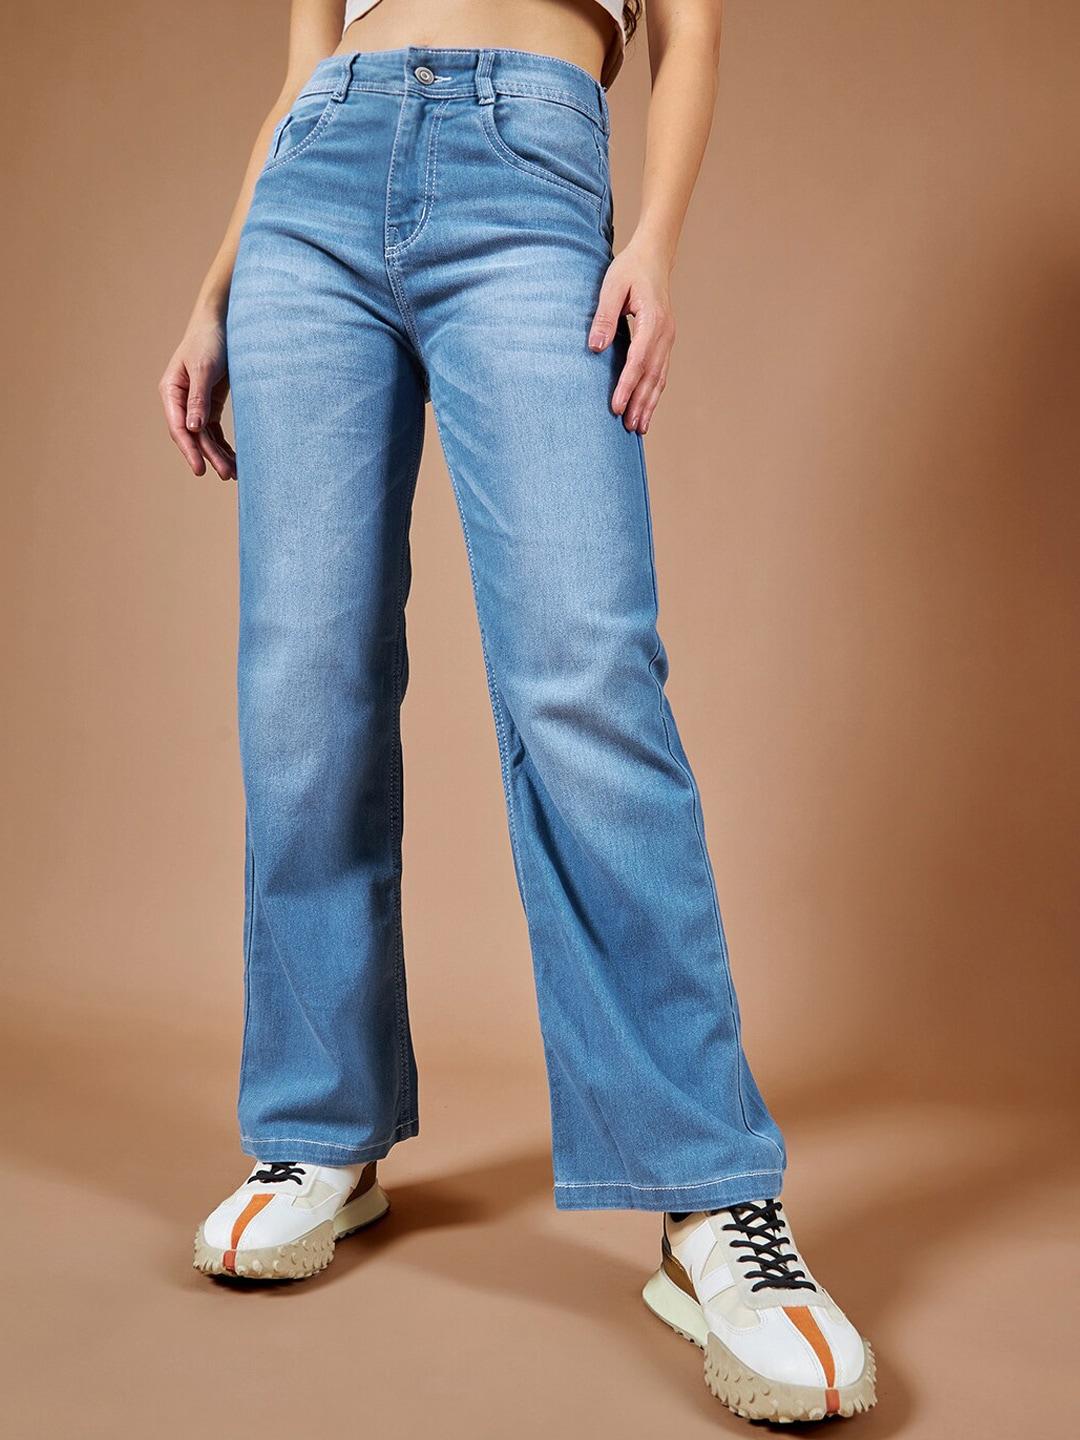 The Roadster Lifestyle Co Wide Leg-Fit Light Fade Stretchable Jeans